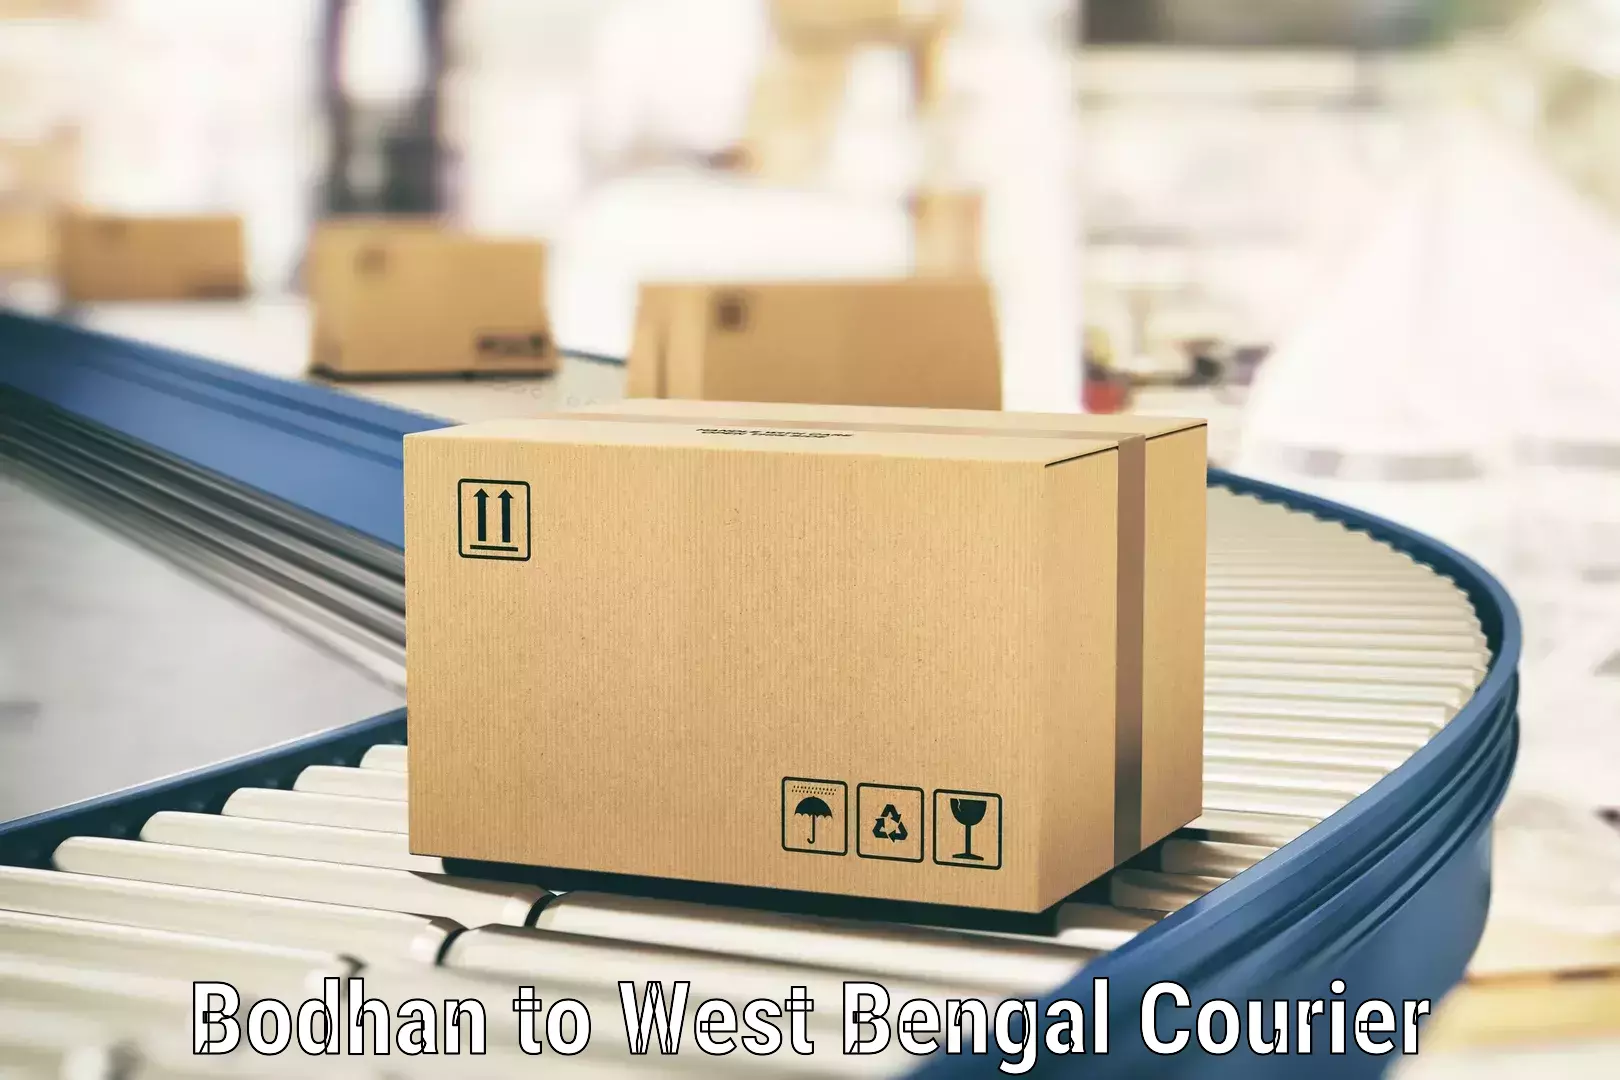 Full-service courier options in Bodhan to West Bengal